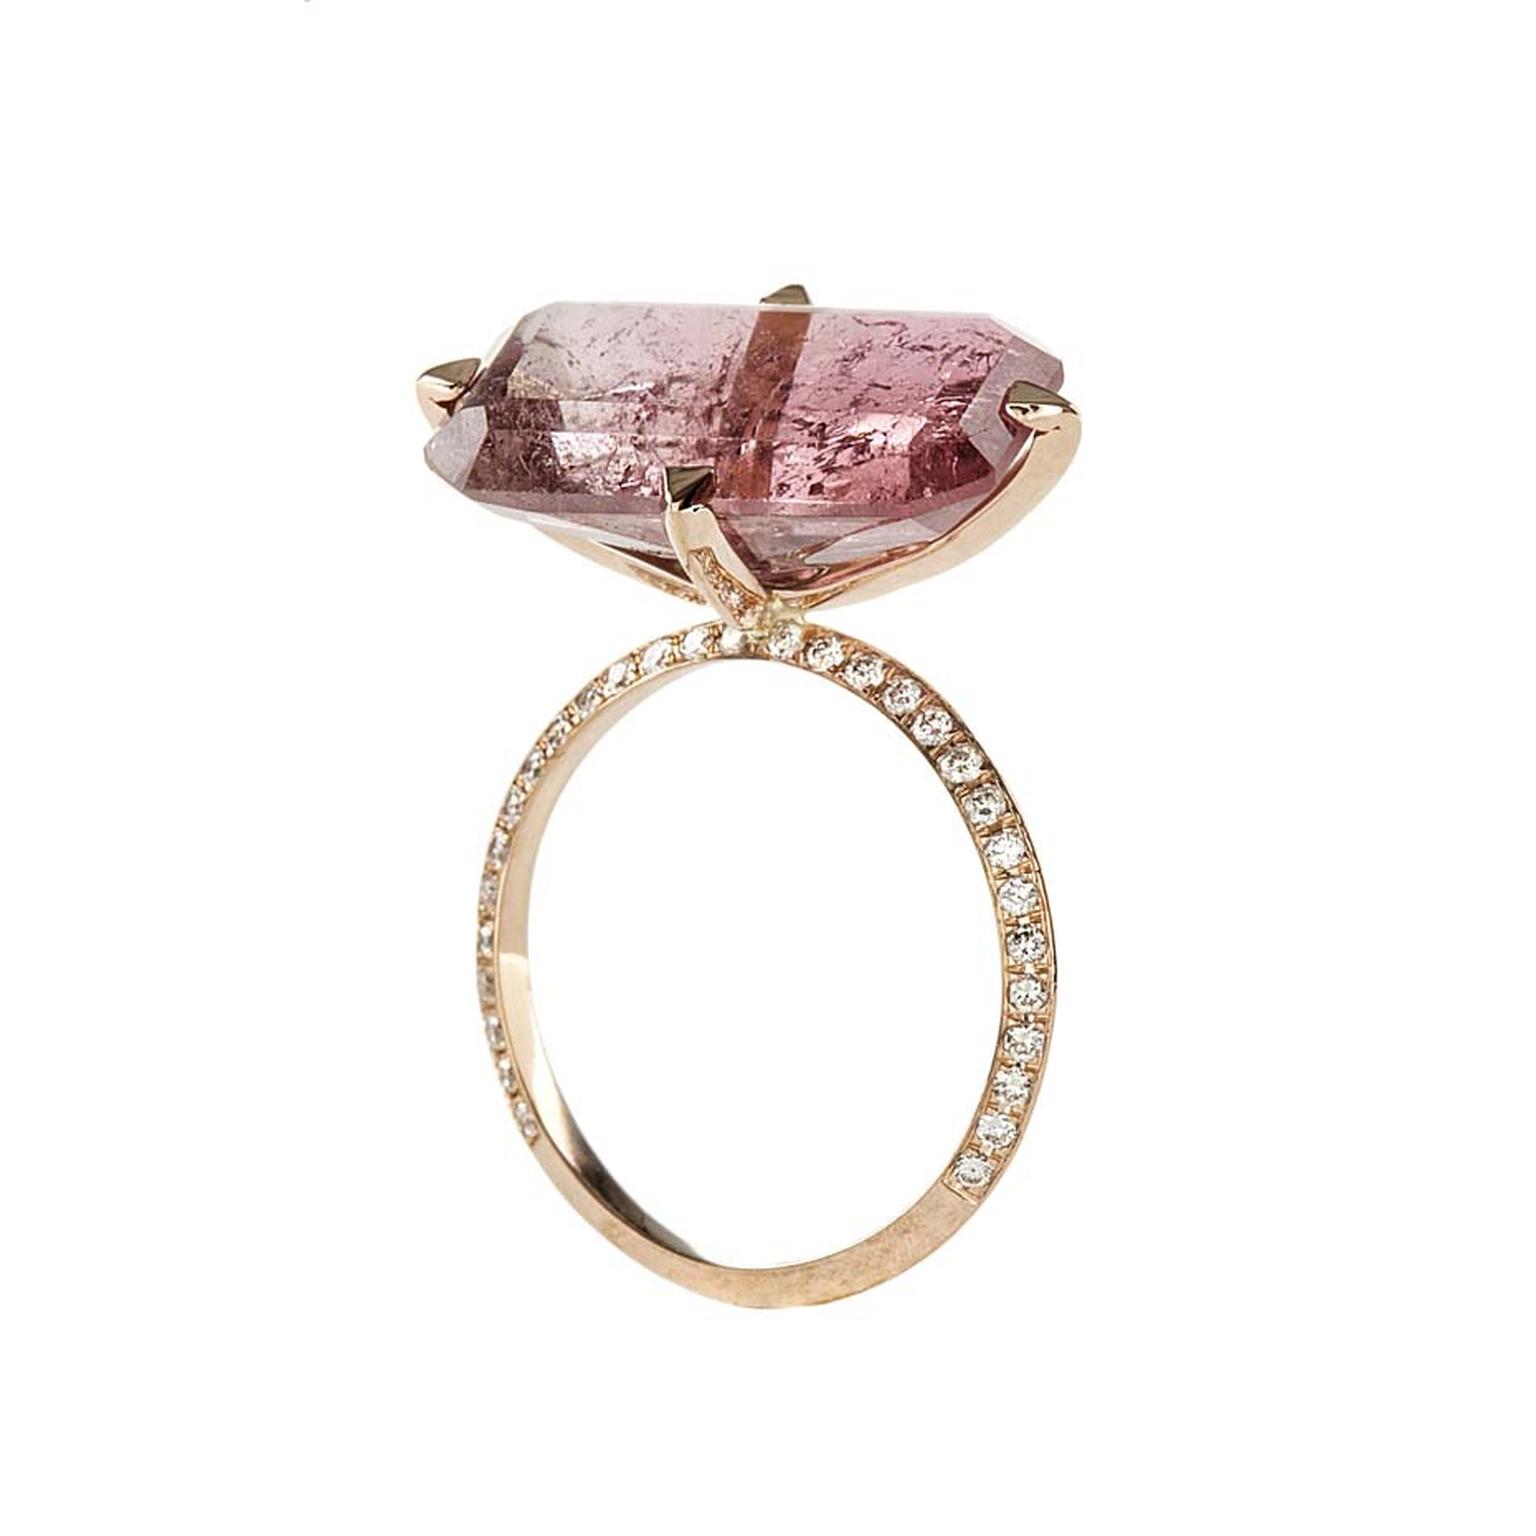 Lito pink gold ring with a 9.35ct pink octagon-cut tourmaline and white brilliant-cut diamonds